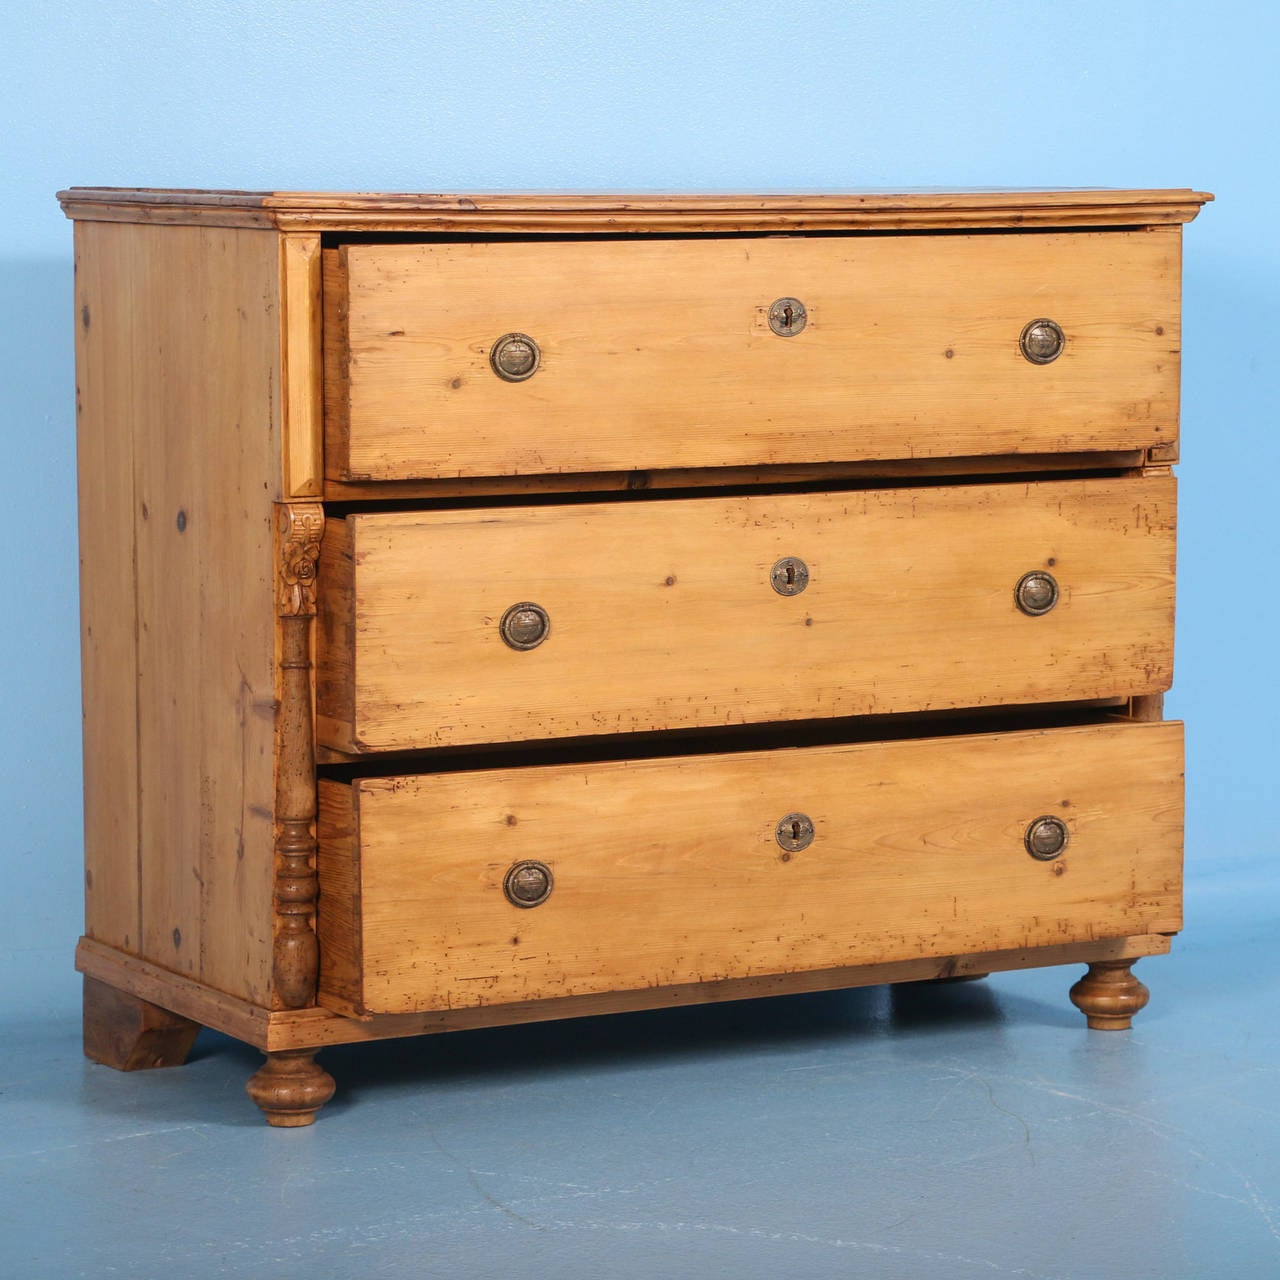 The top drawer slightly extends beyond the bottom drawers in this chest of three drawers. The half column details topped by a carved flower add to the charm of the piece. The pine has been waxed, bringing out the warmth of the wood and all the